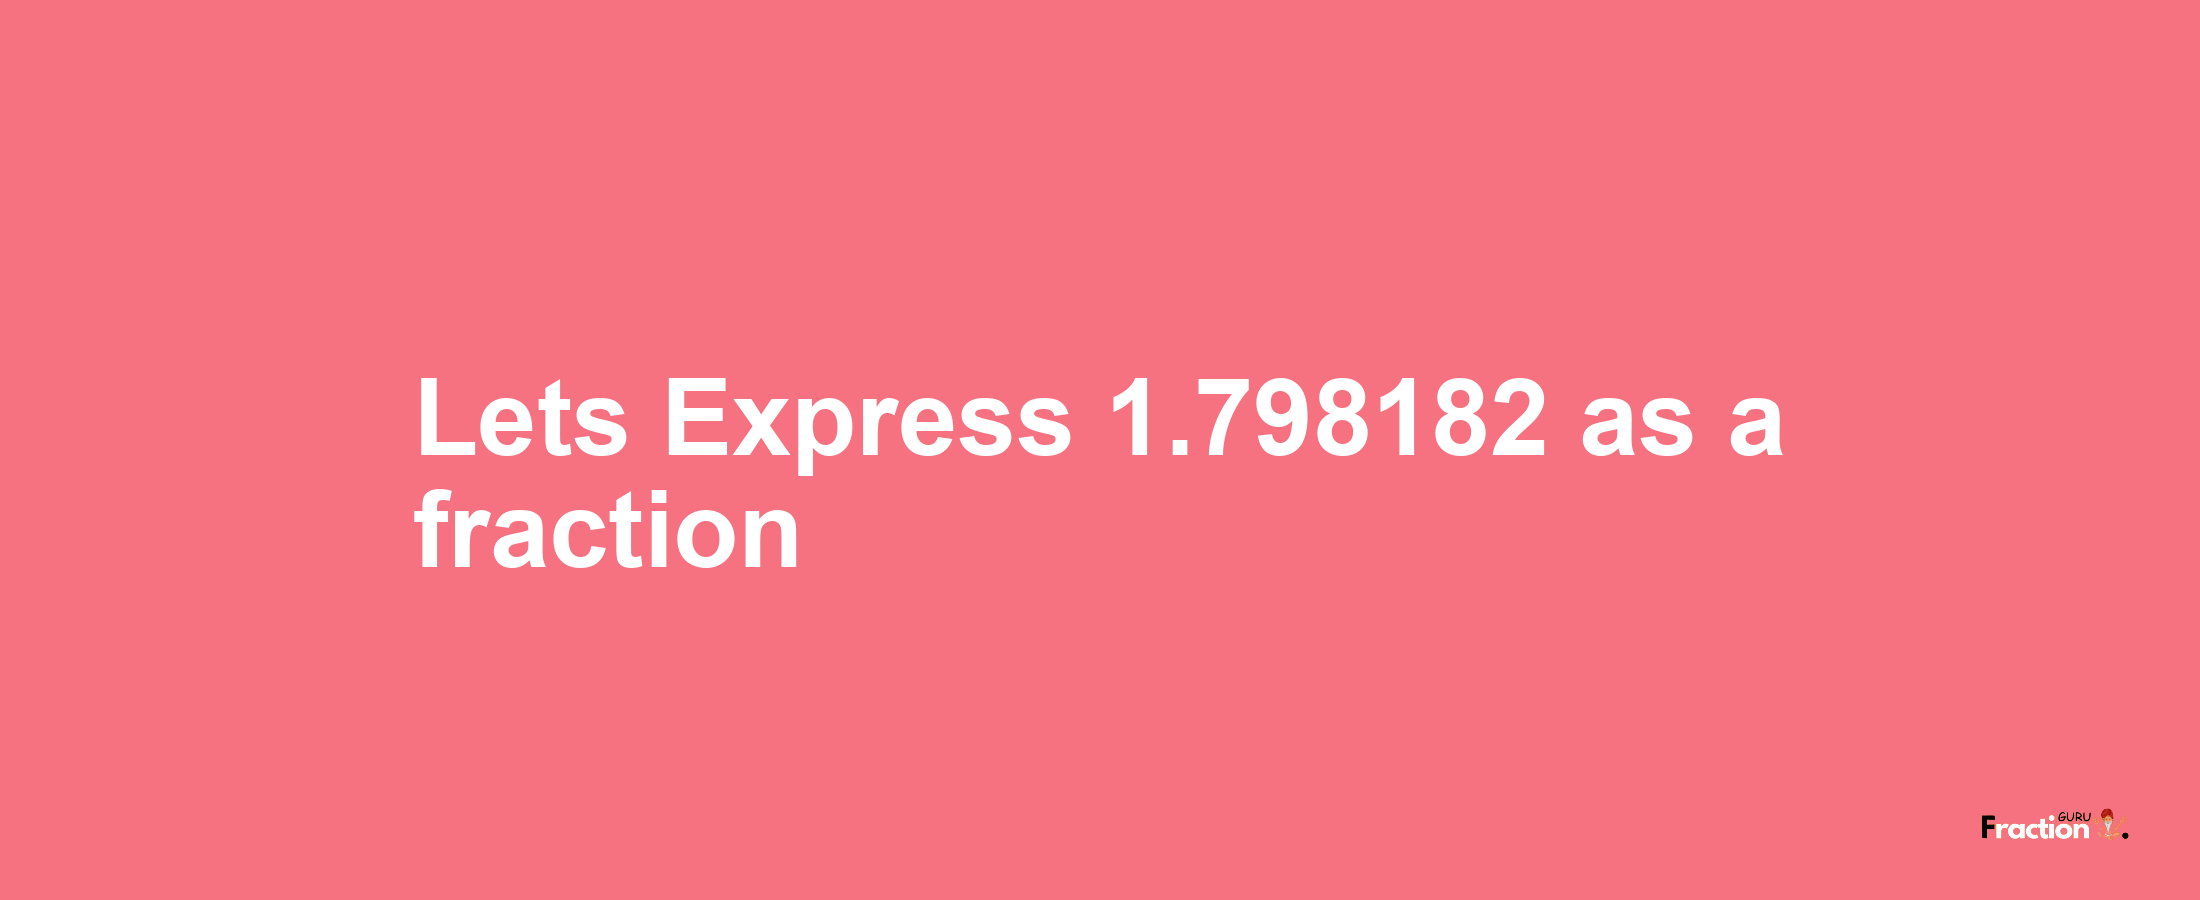 Lets Express 1.798182 as afraction